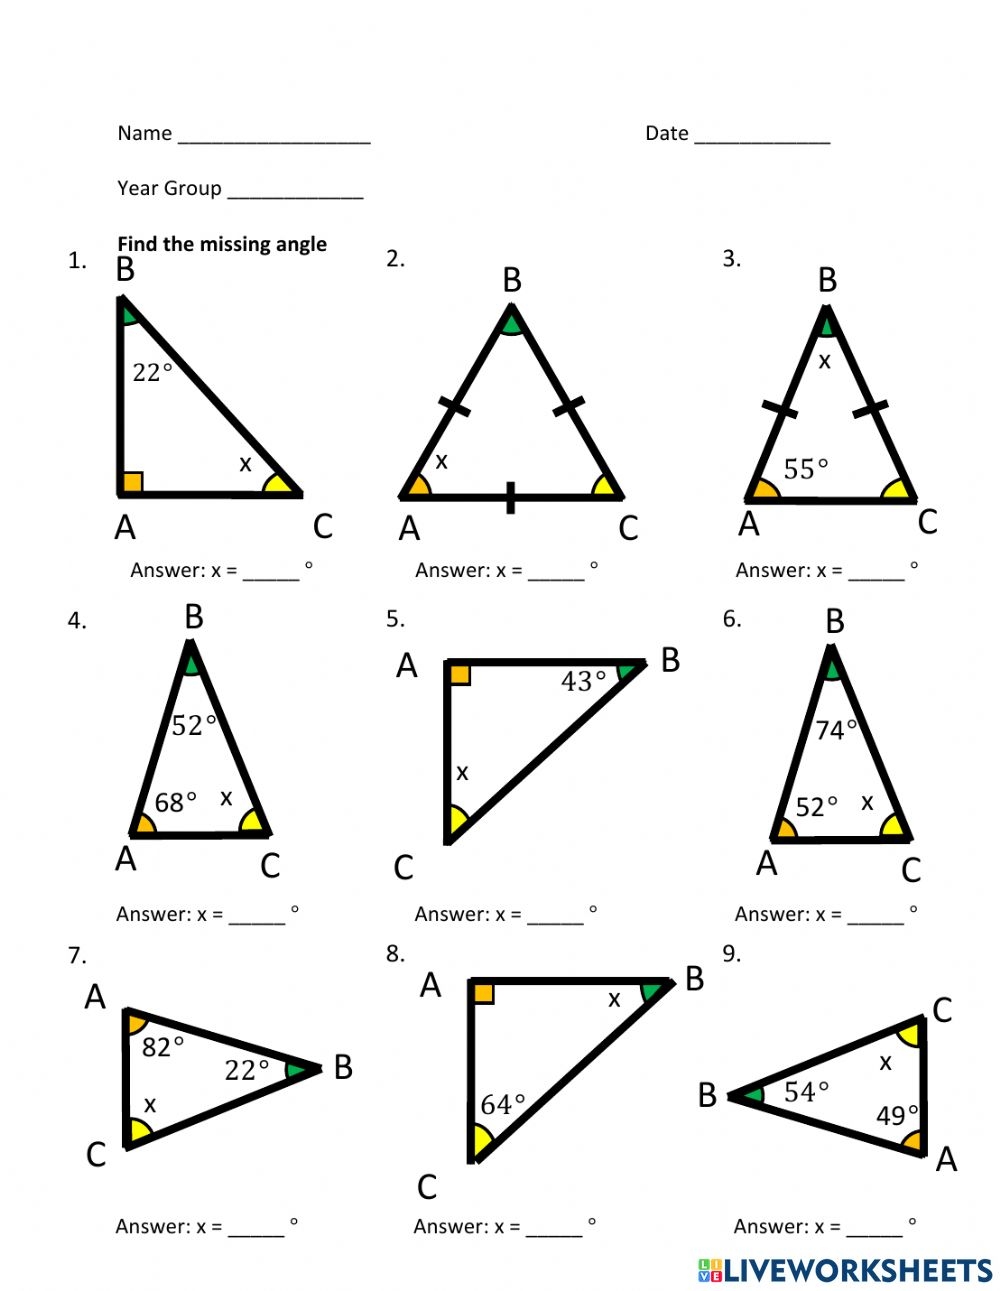 triangles-find-missing-angle-worksheet-math-worksheet-answers